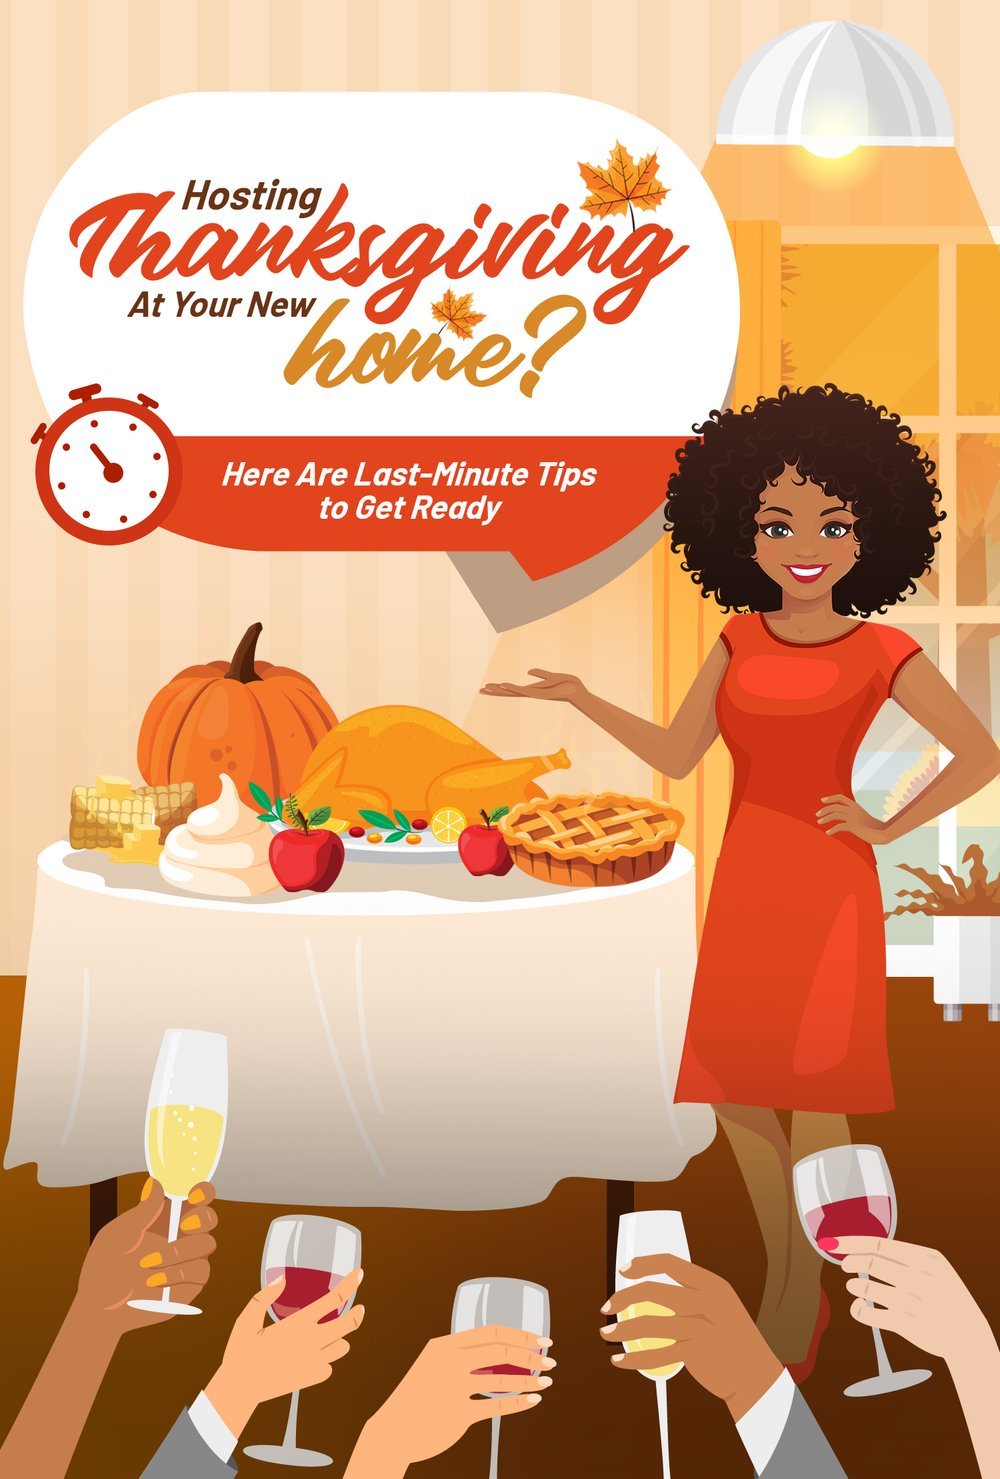 Hosting Thanksgiving At Your New Home? Here Are Last-Minute Tips to Get Ready